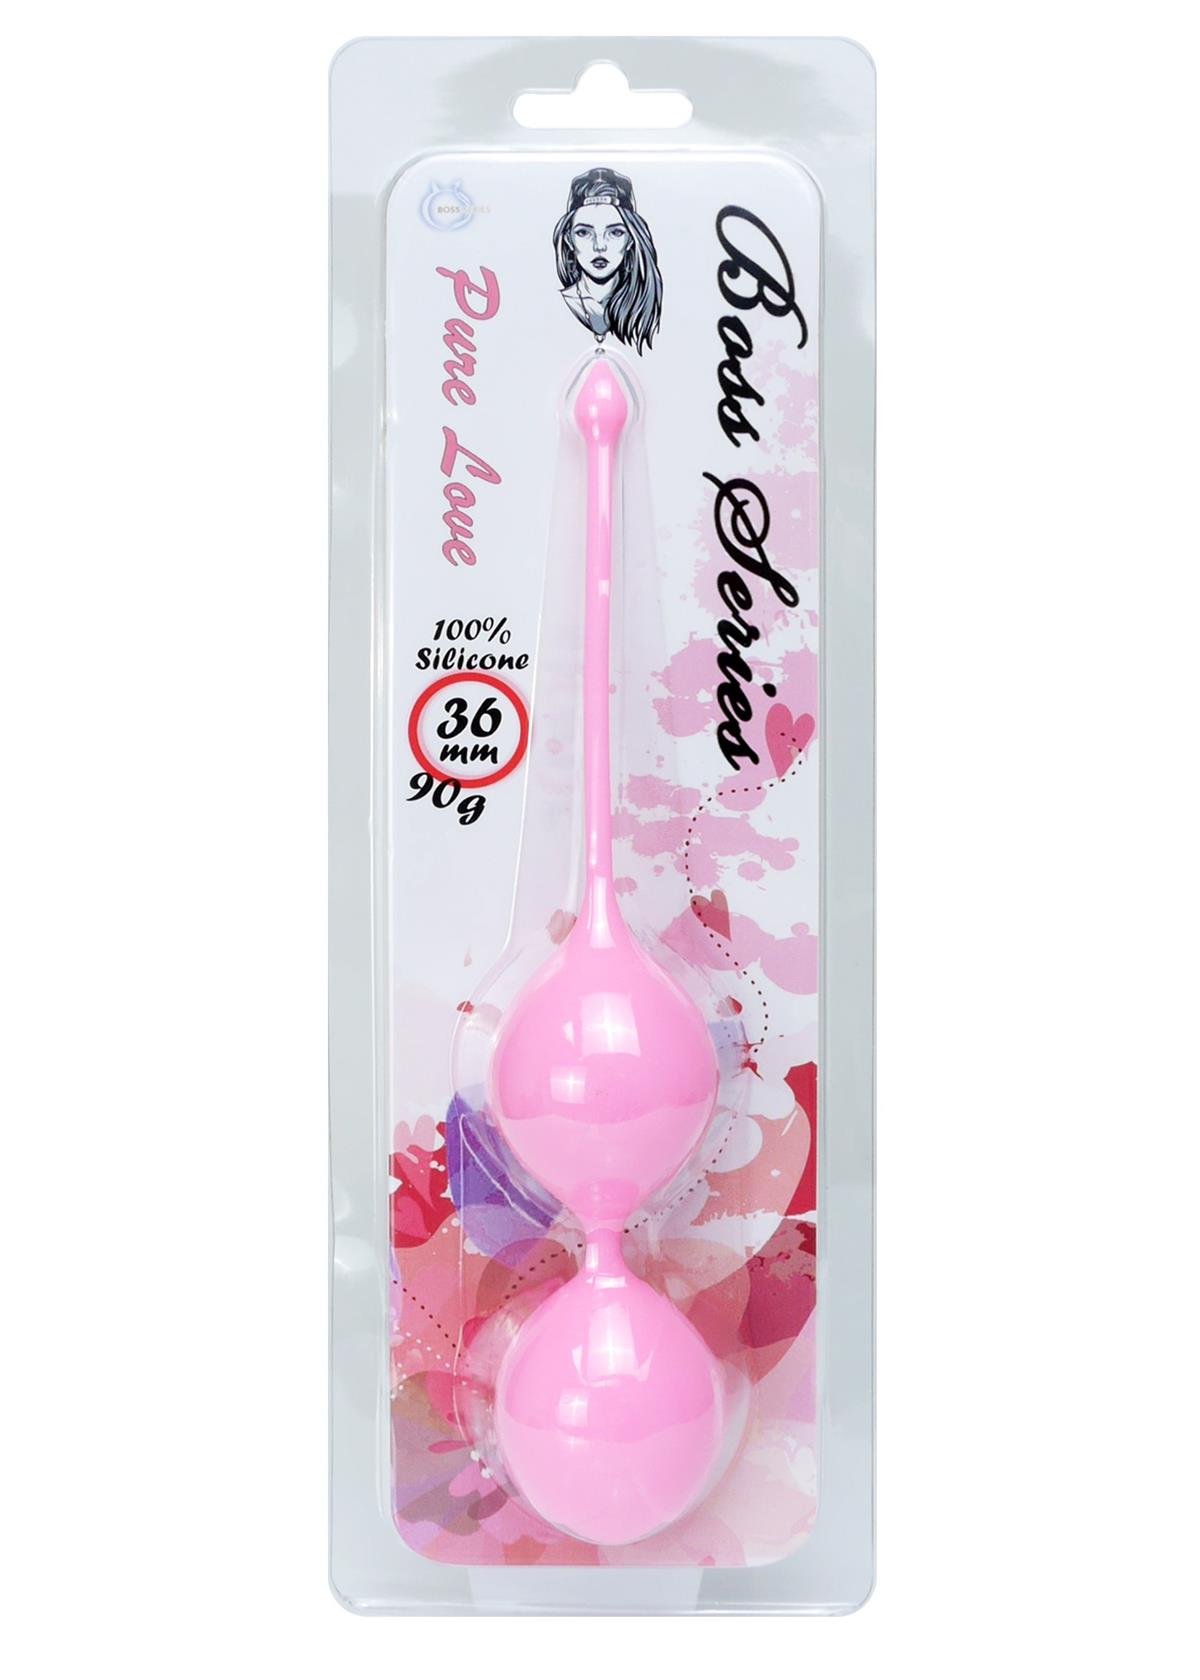 Bossoftoys - 75-0004 - Silicone Kegel Balls - 29 mm 90g Pink - 75-00004 - strong blister